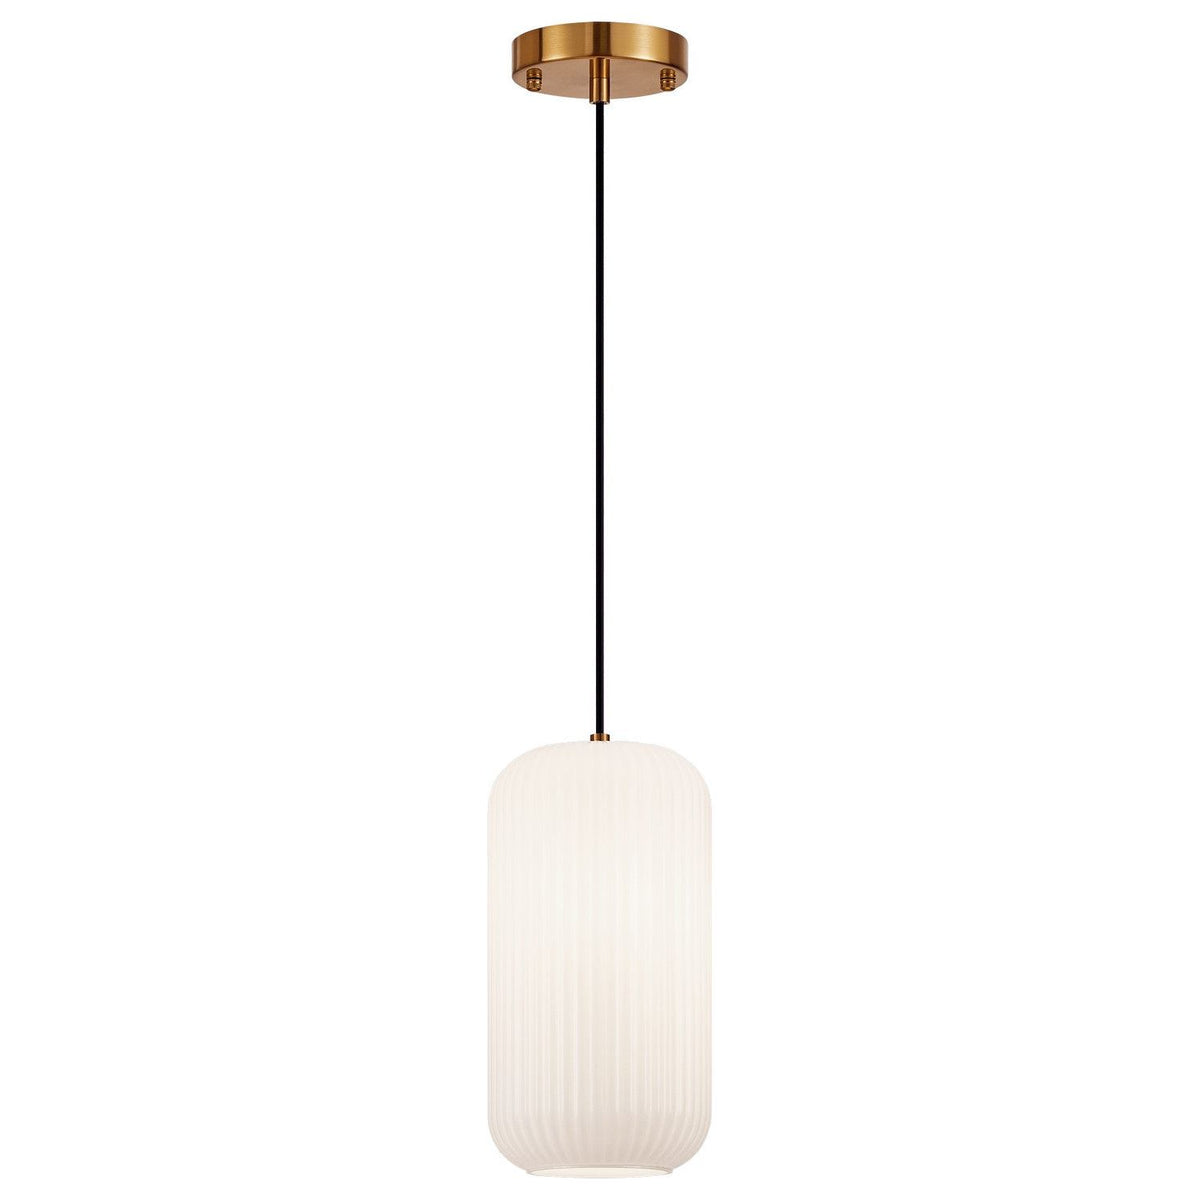 Matteo Canada - C61002AGOP - One Light Pendant - Charismo - Aged Gold Brass